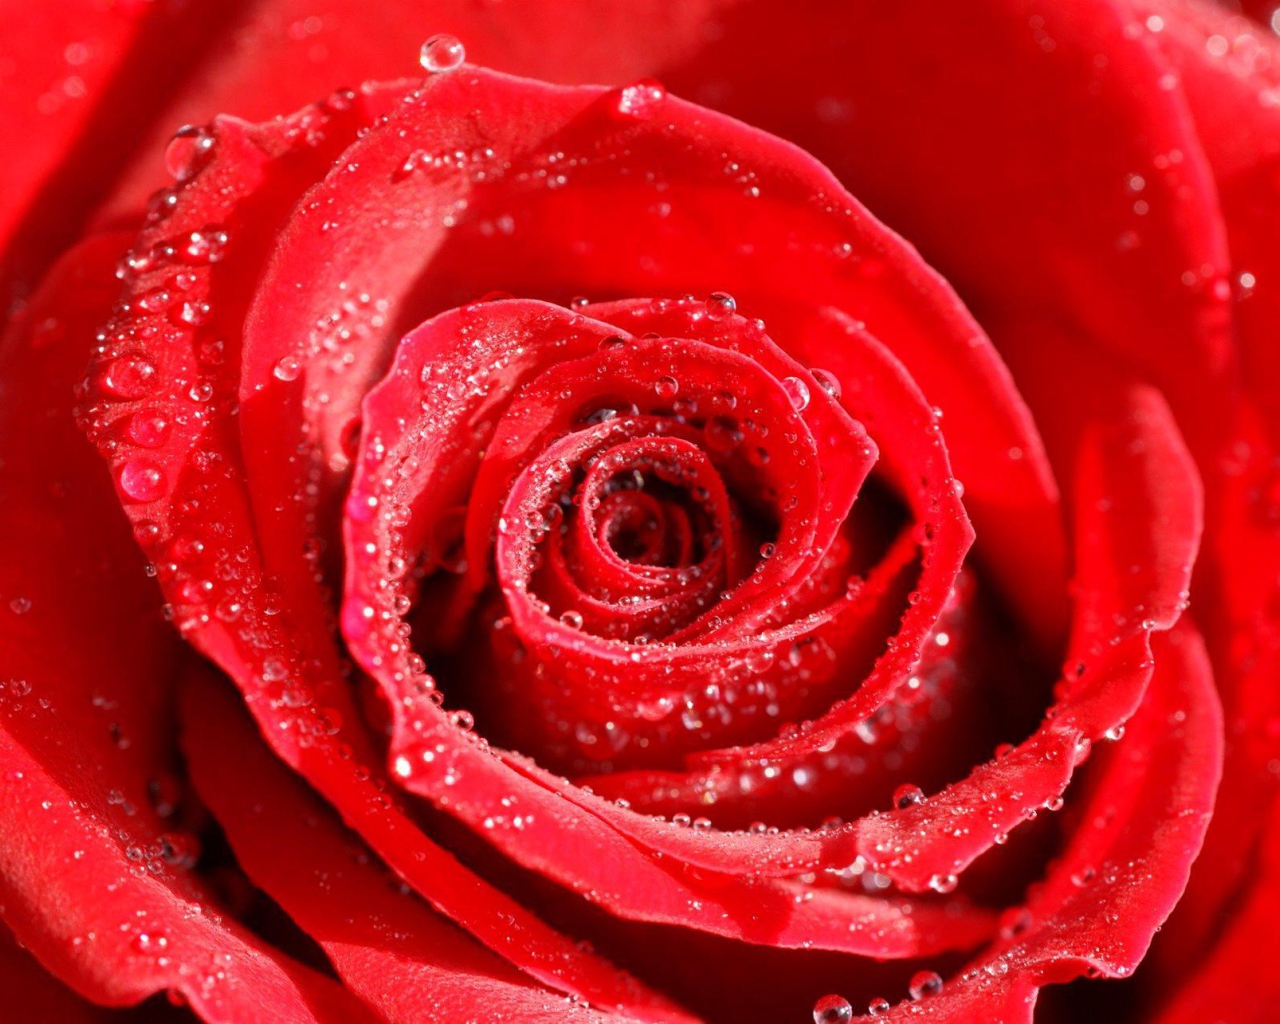 Dew on a rose on Valentine's Day